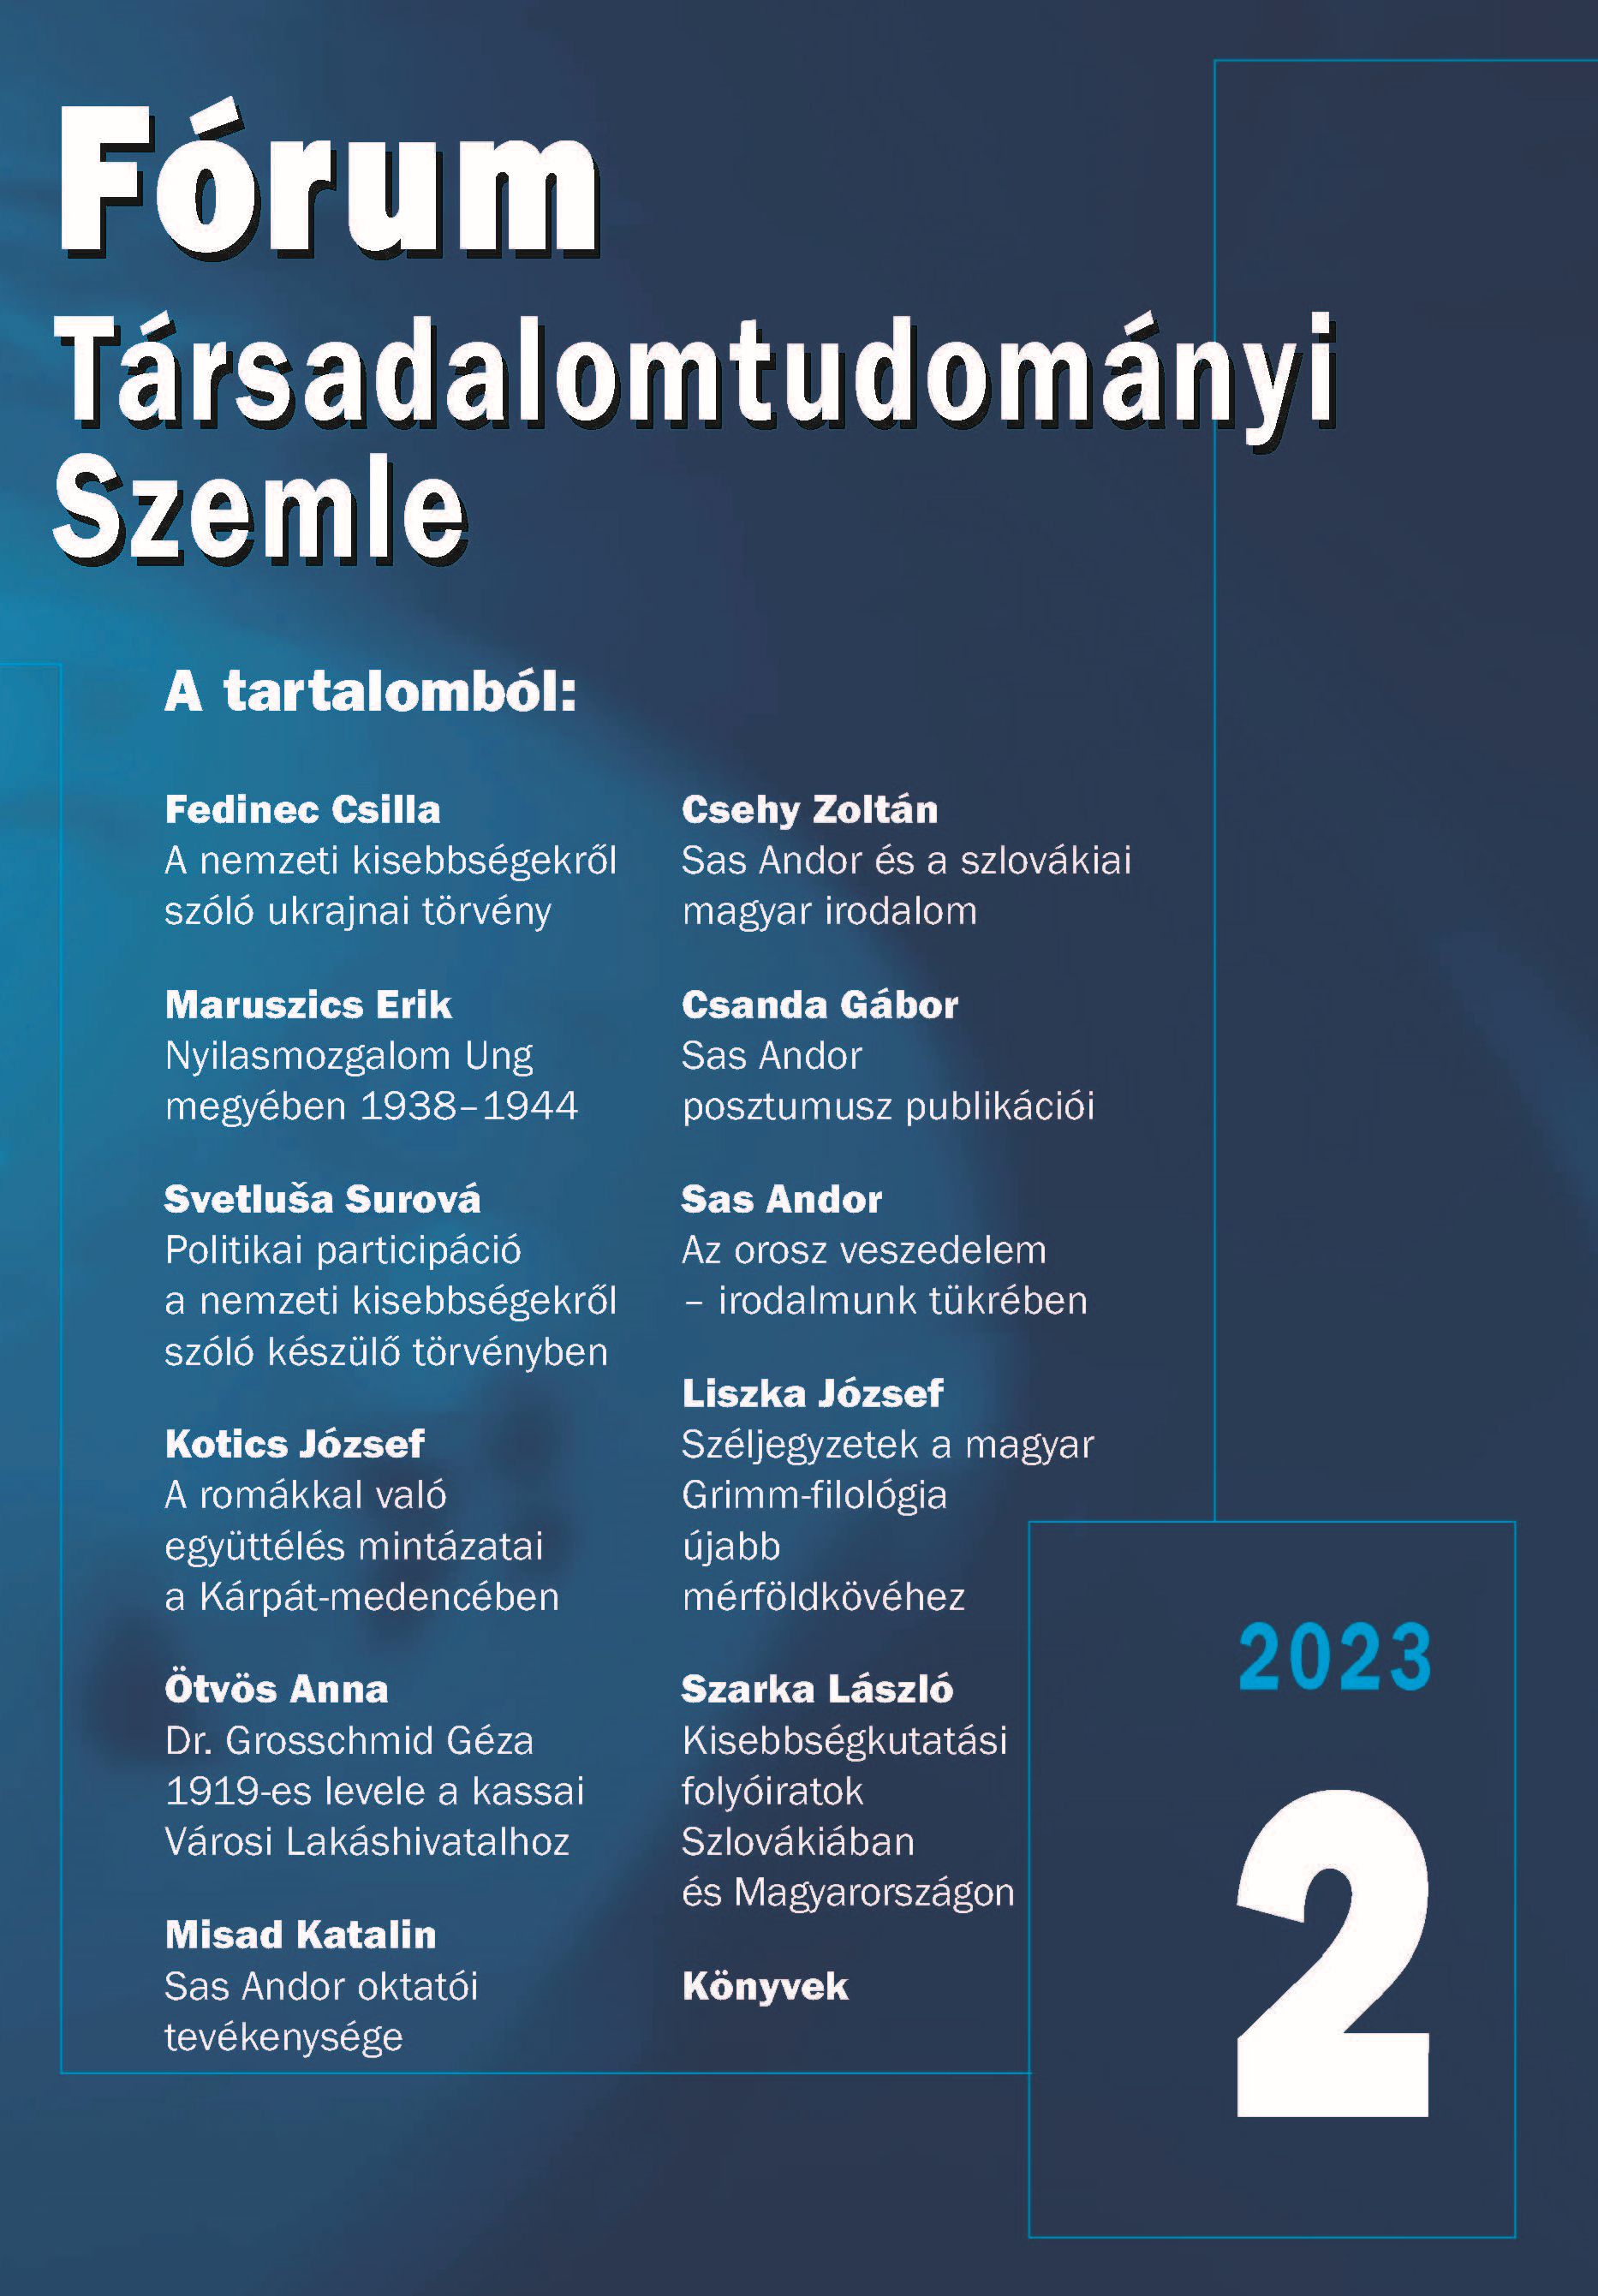 Andor Sas and the Hungarian Literature in (Czecho)Slovakia Cover Image